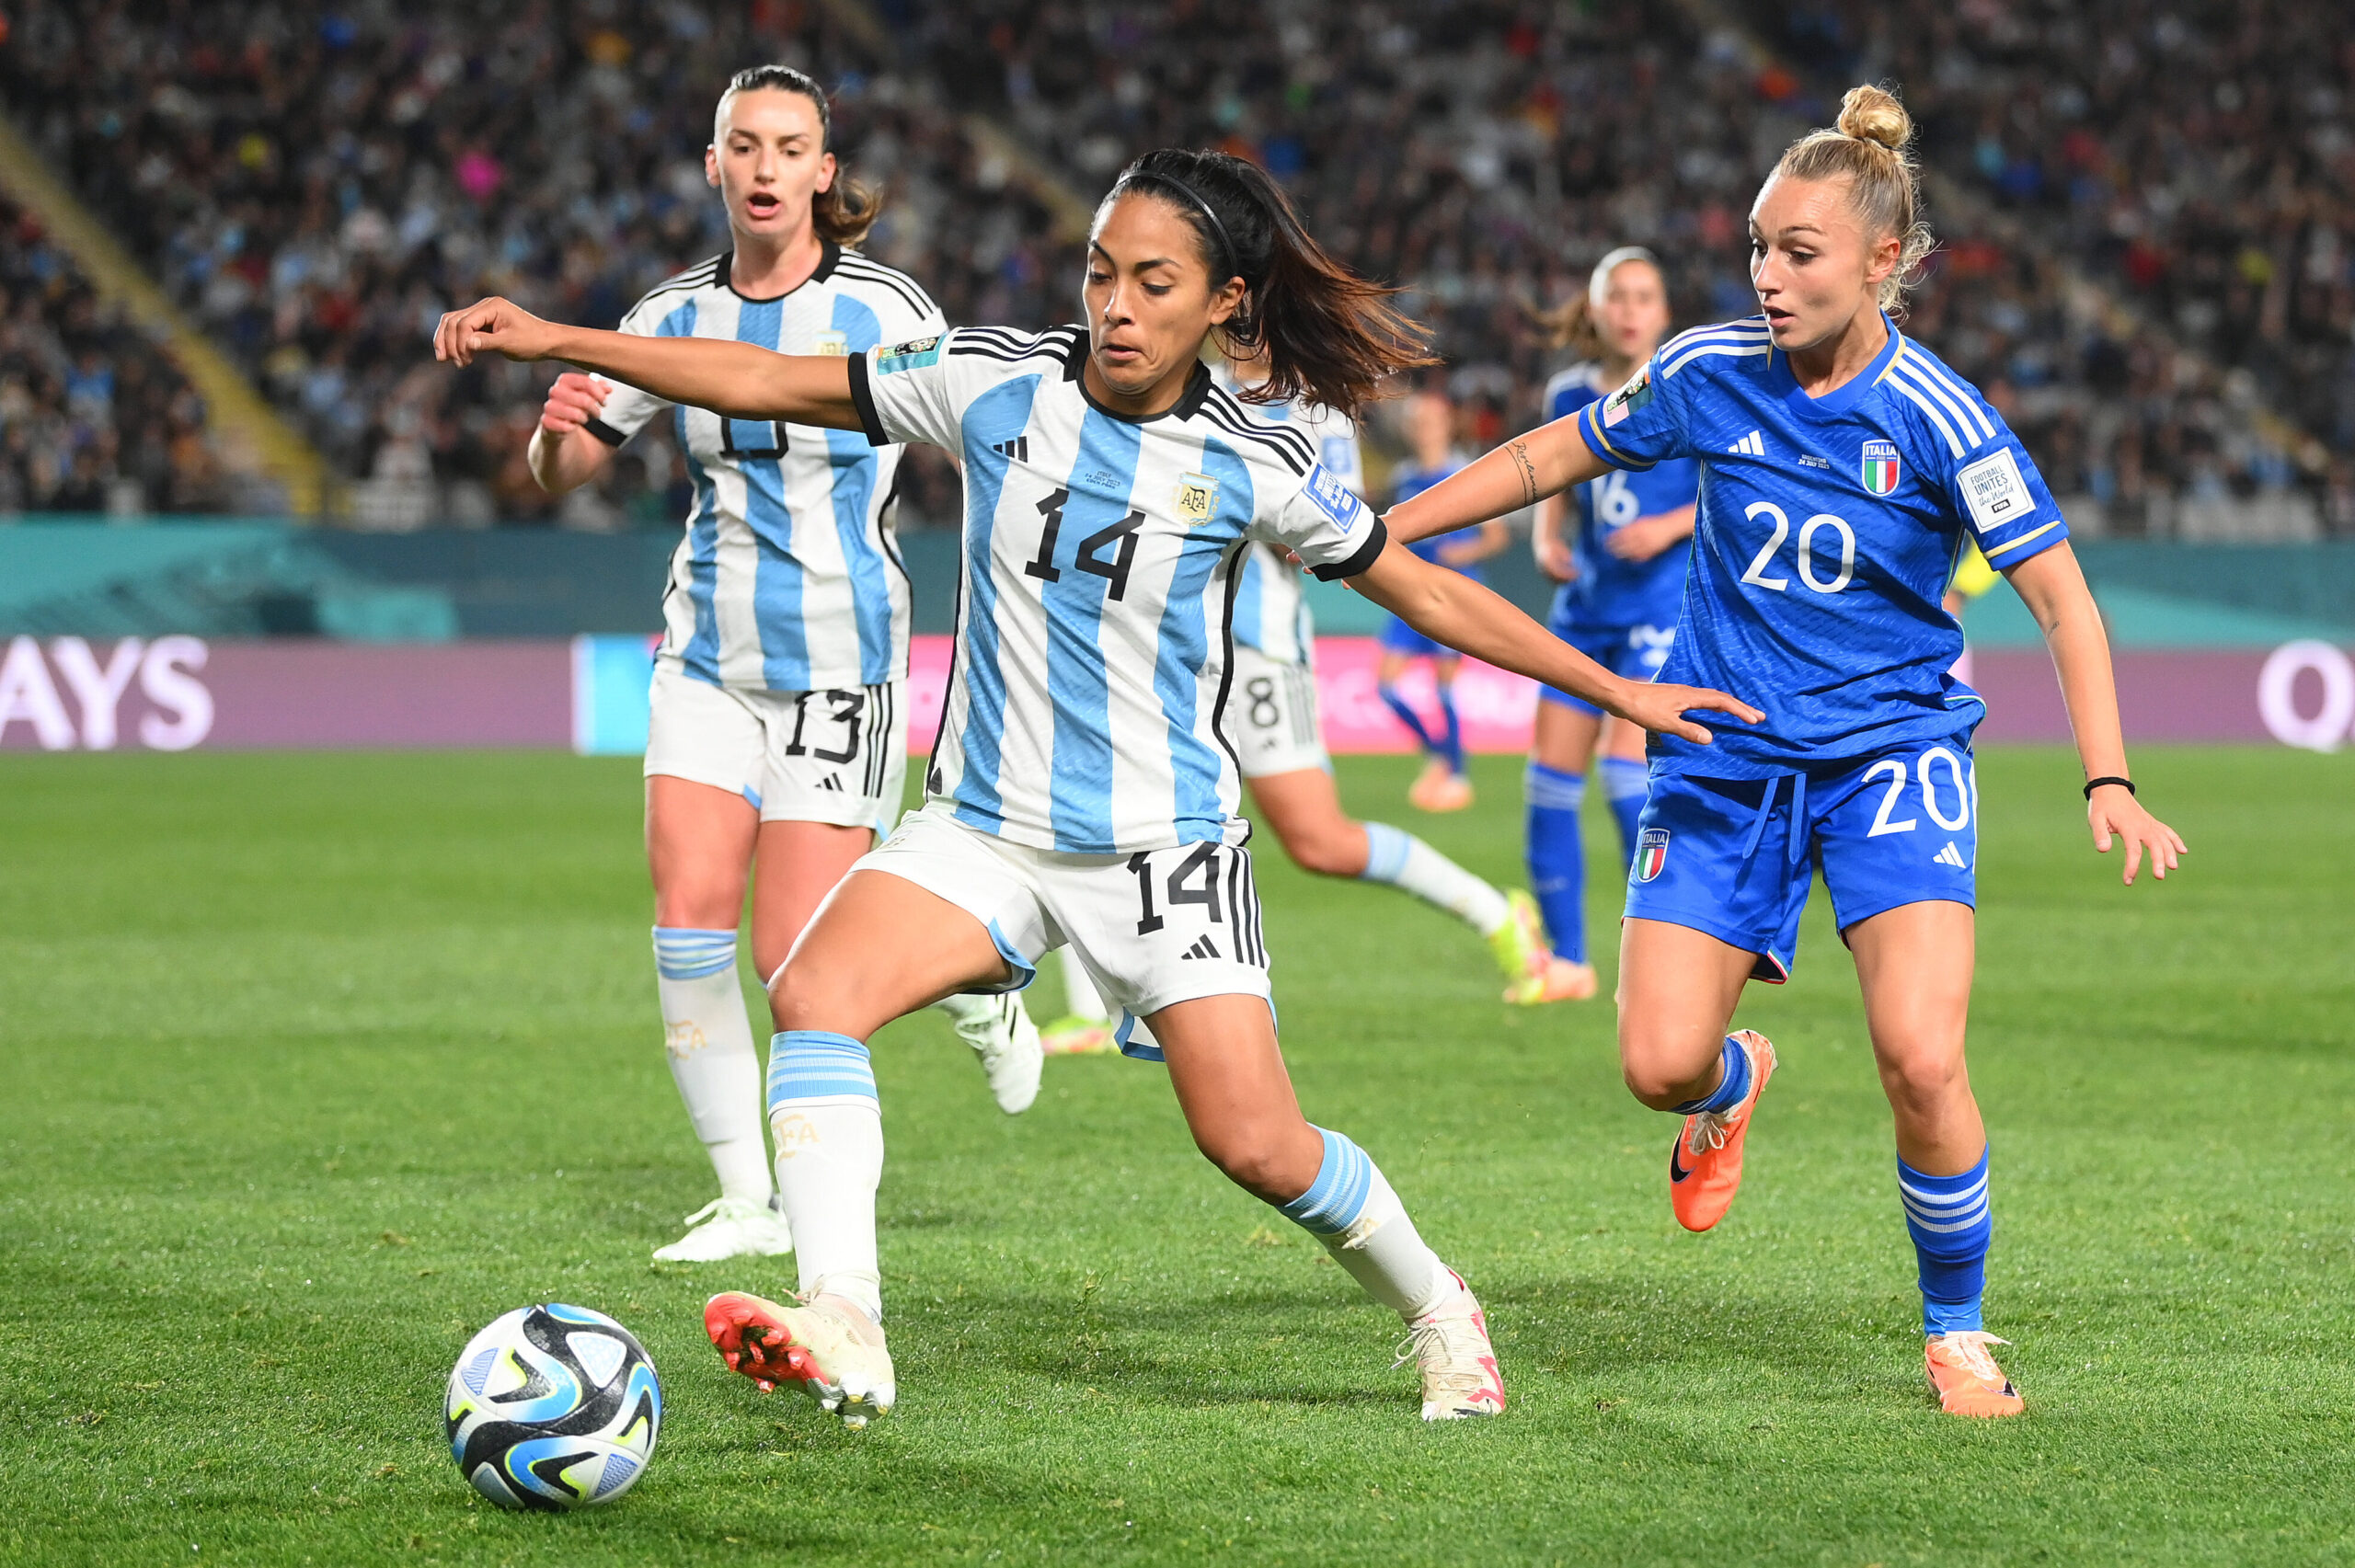 Betting Preview for the Argentina vs Sweden Women’s World Cup 2023 Group Stage Match on August 2, 2023